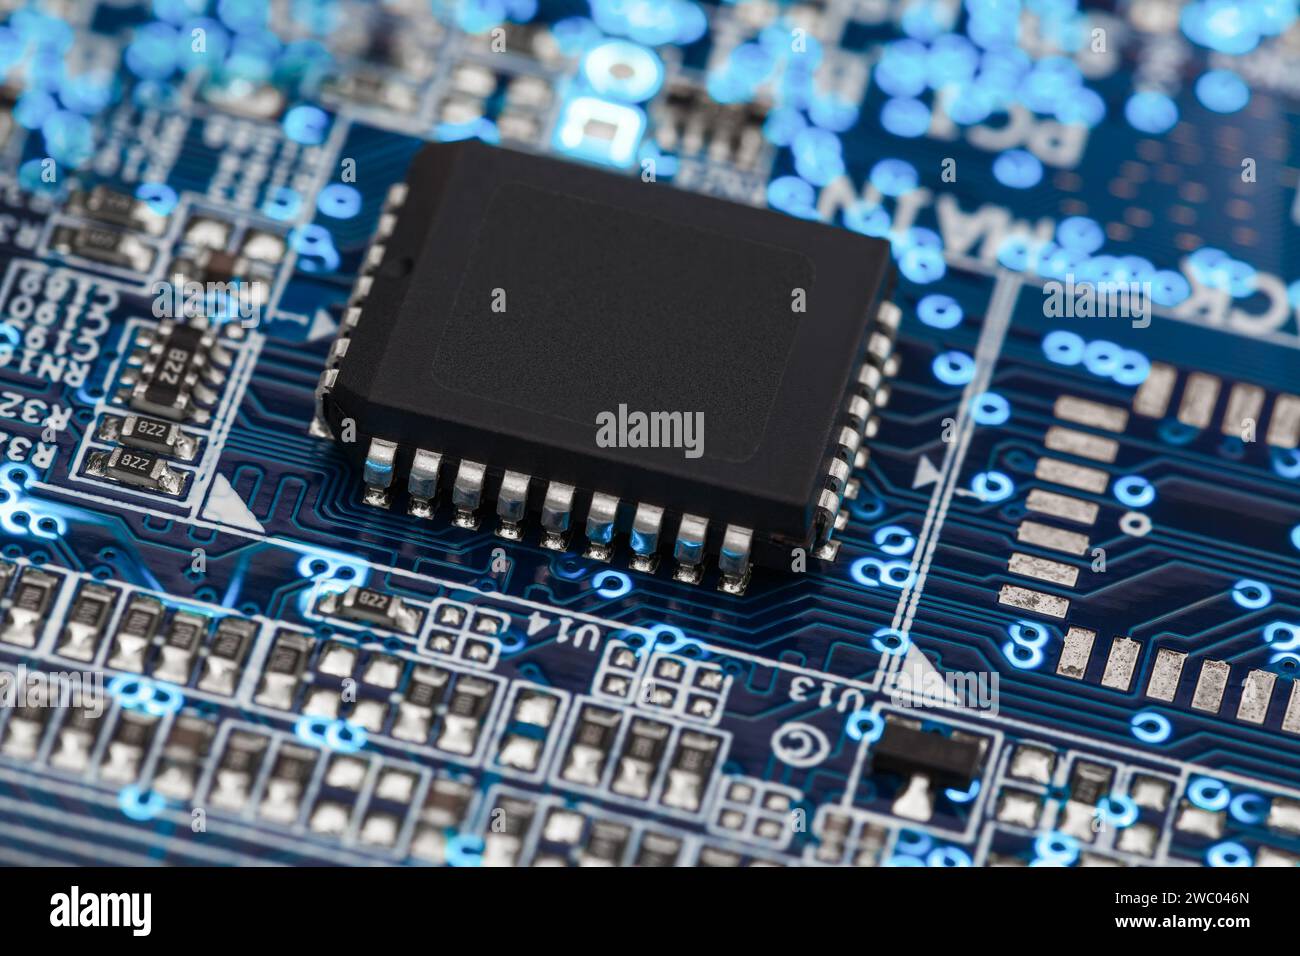 A microprocessor on a printed circuit board surrounded by auxiliary elements, backlit through the board. Macrofto in dark colors Stock Photo